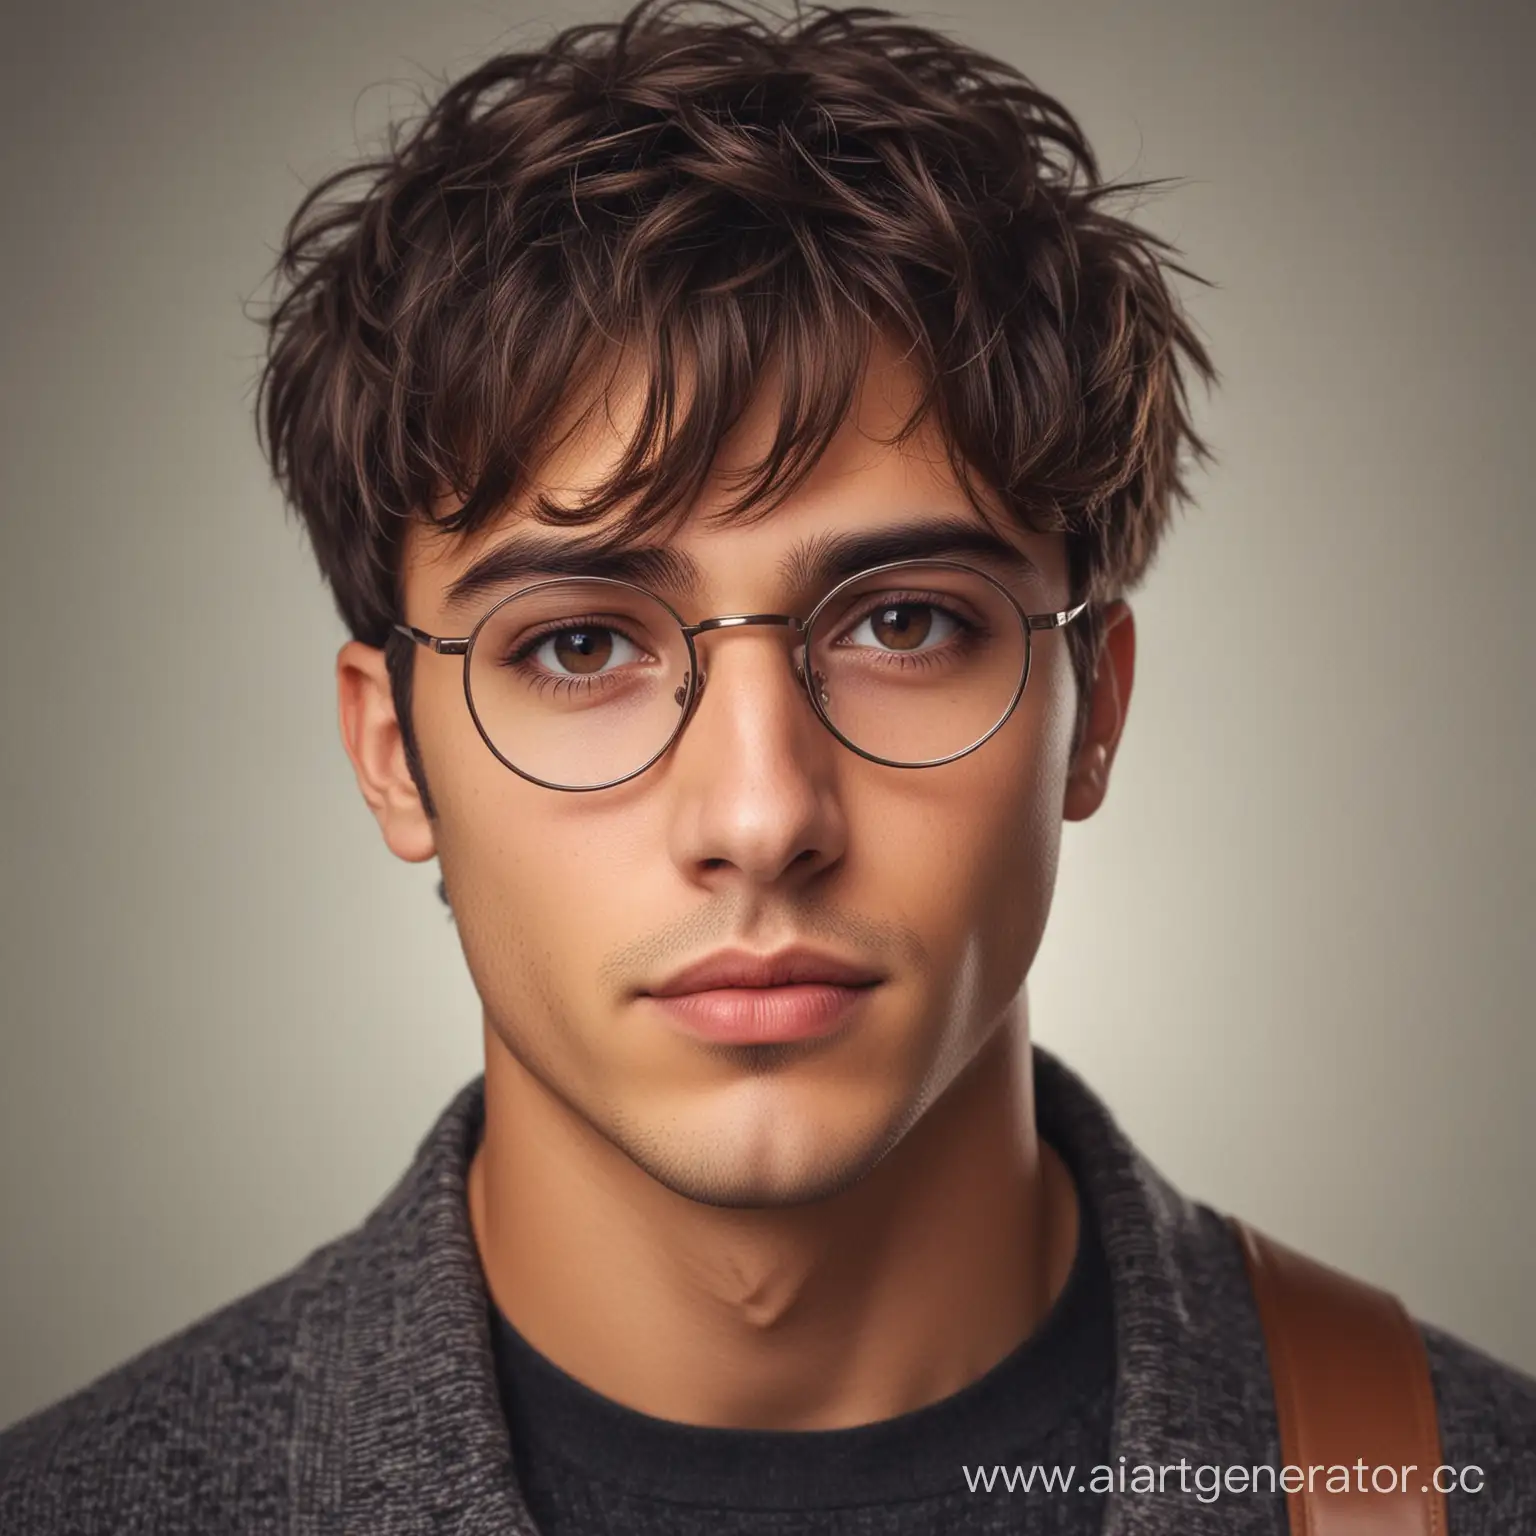 Young-Brunet-Man-with-Round-Glasses-Captivating-Charm